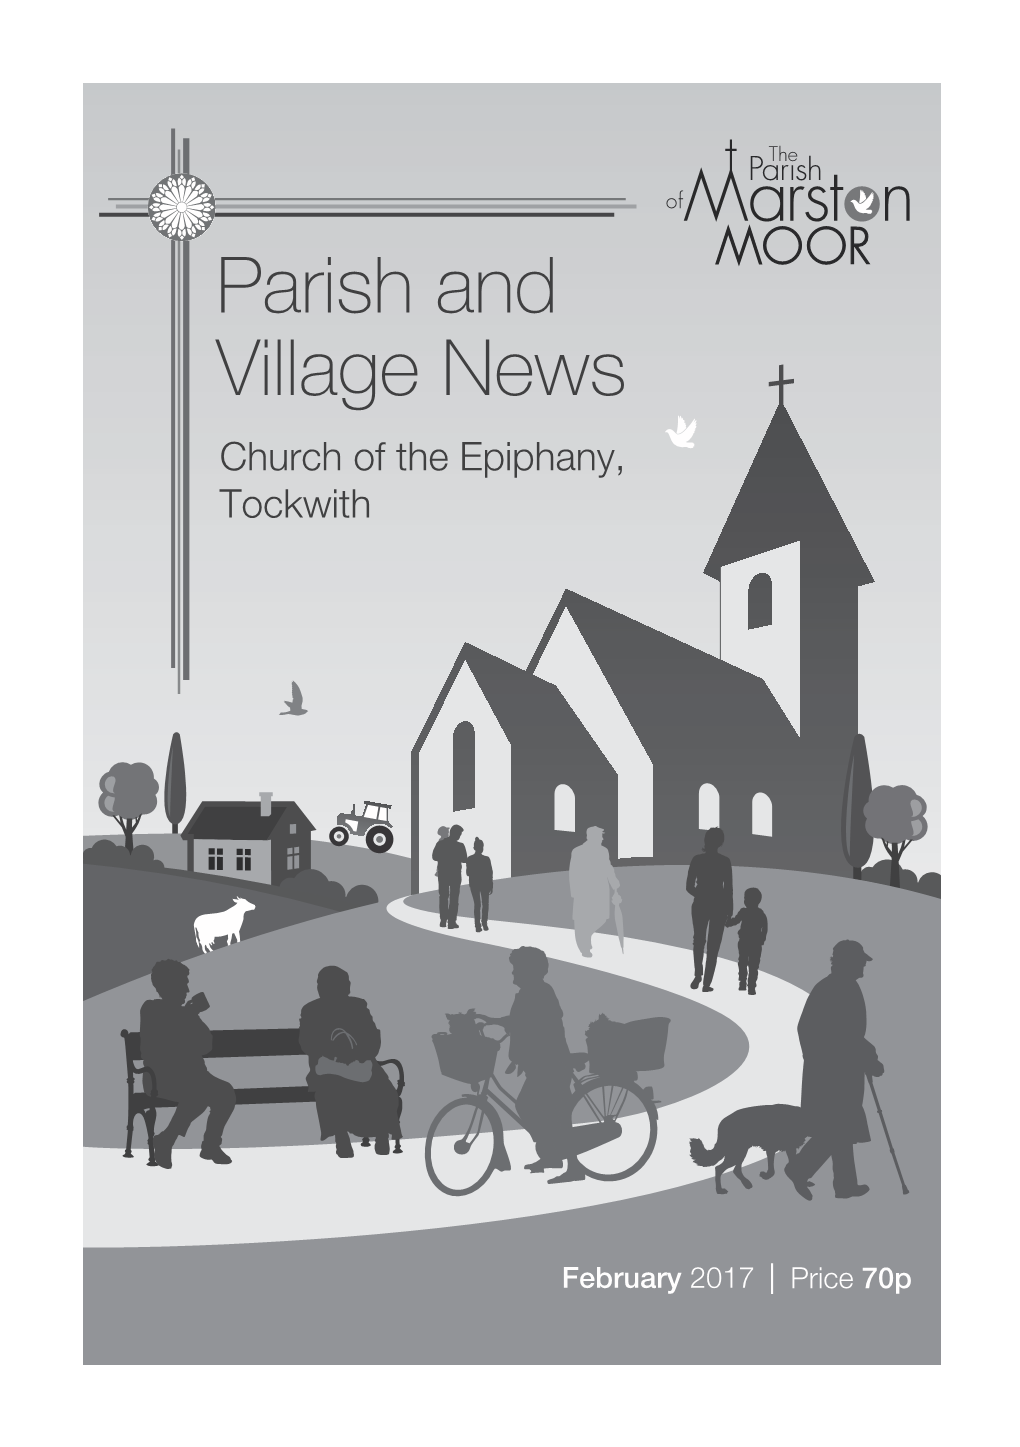 Parish and Village News Church of the Epiphany, Tockwith